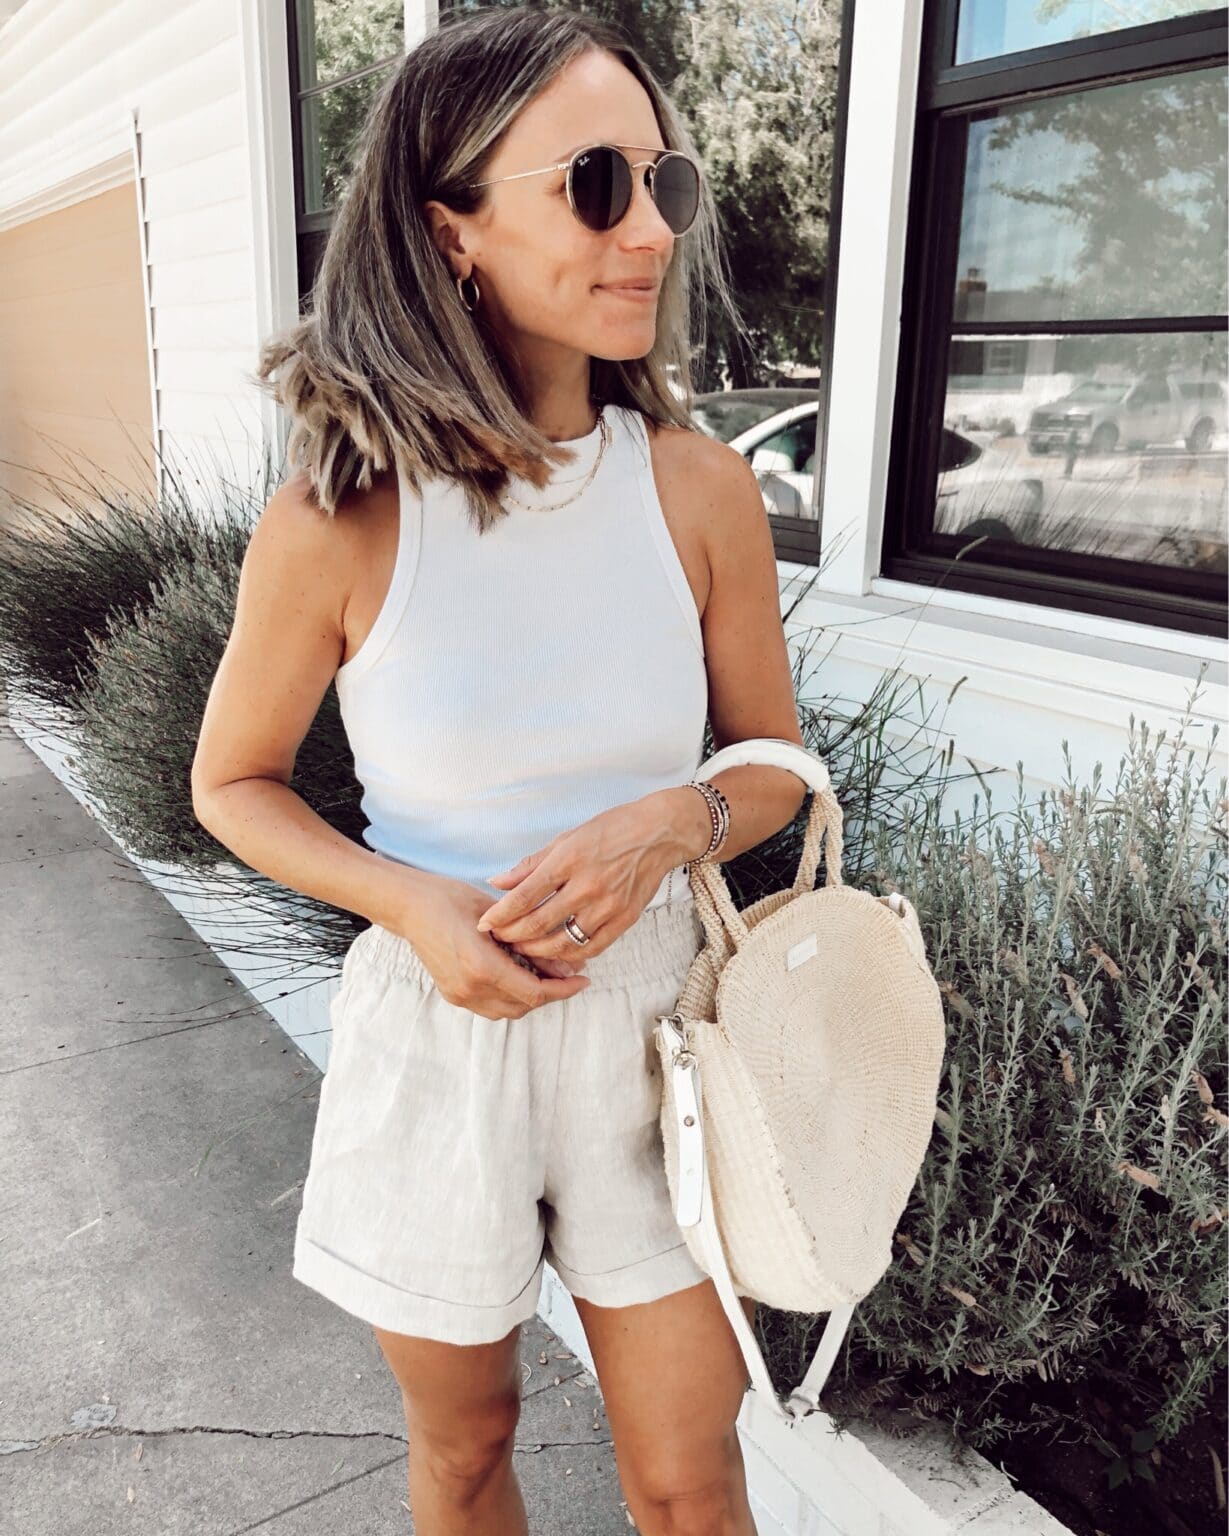 Everyday Style || 8 Ways To Wear Linen Shorts - posts from Shannon Pulsifer